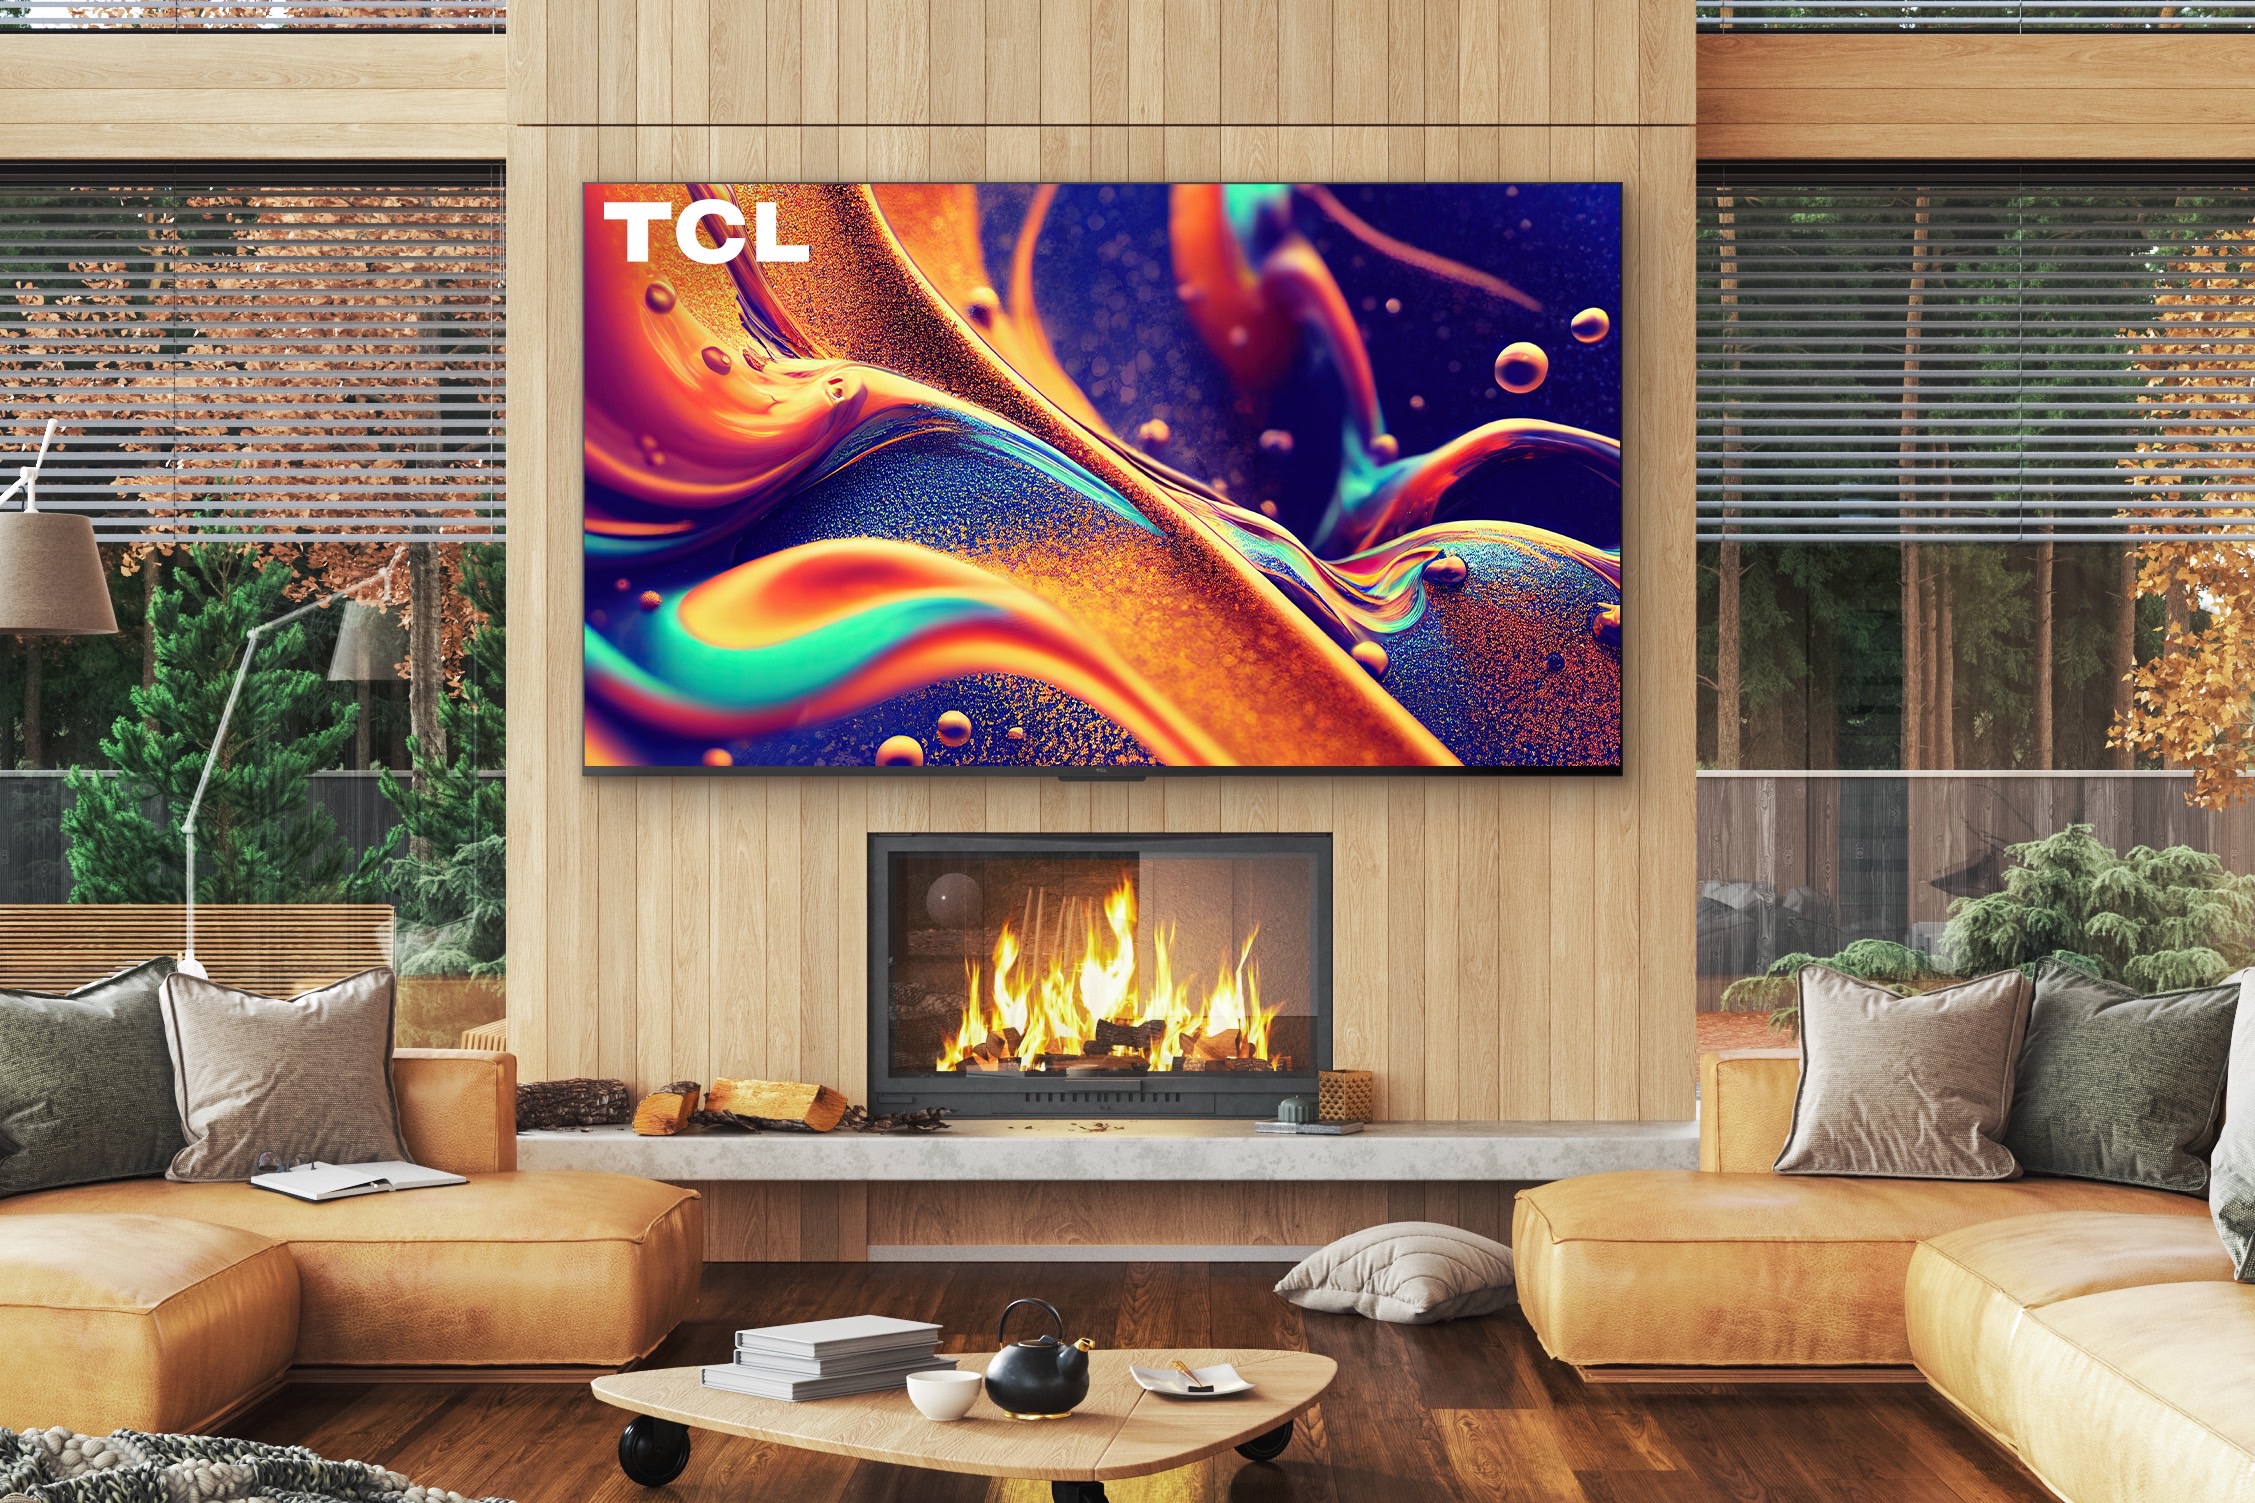 A 2023 TCL QM8 4K mini-led QLED TV in a living room, mounted over a fireplace.